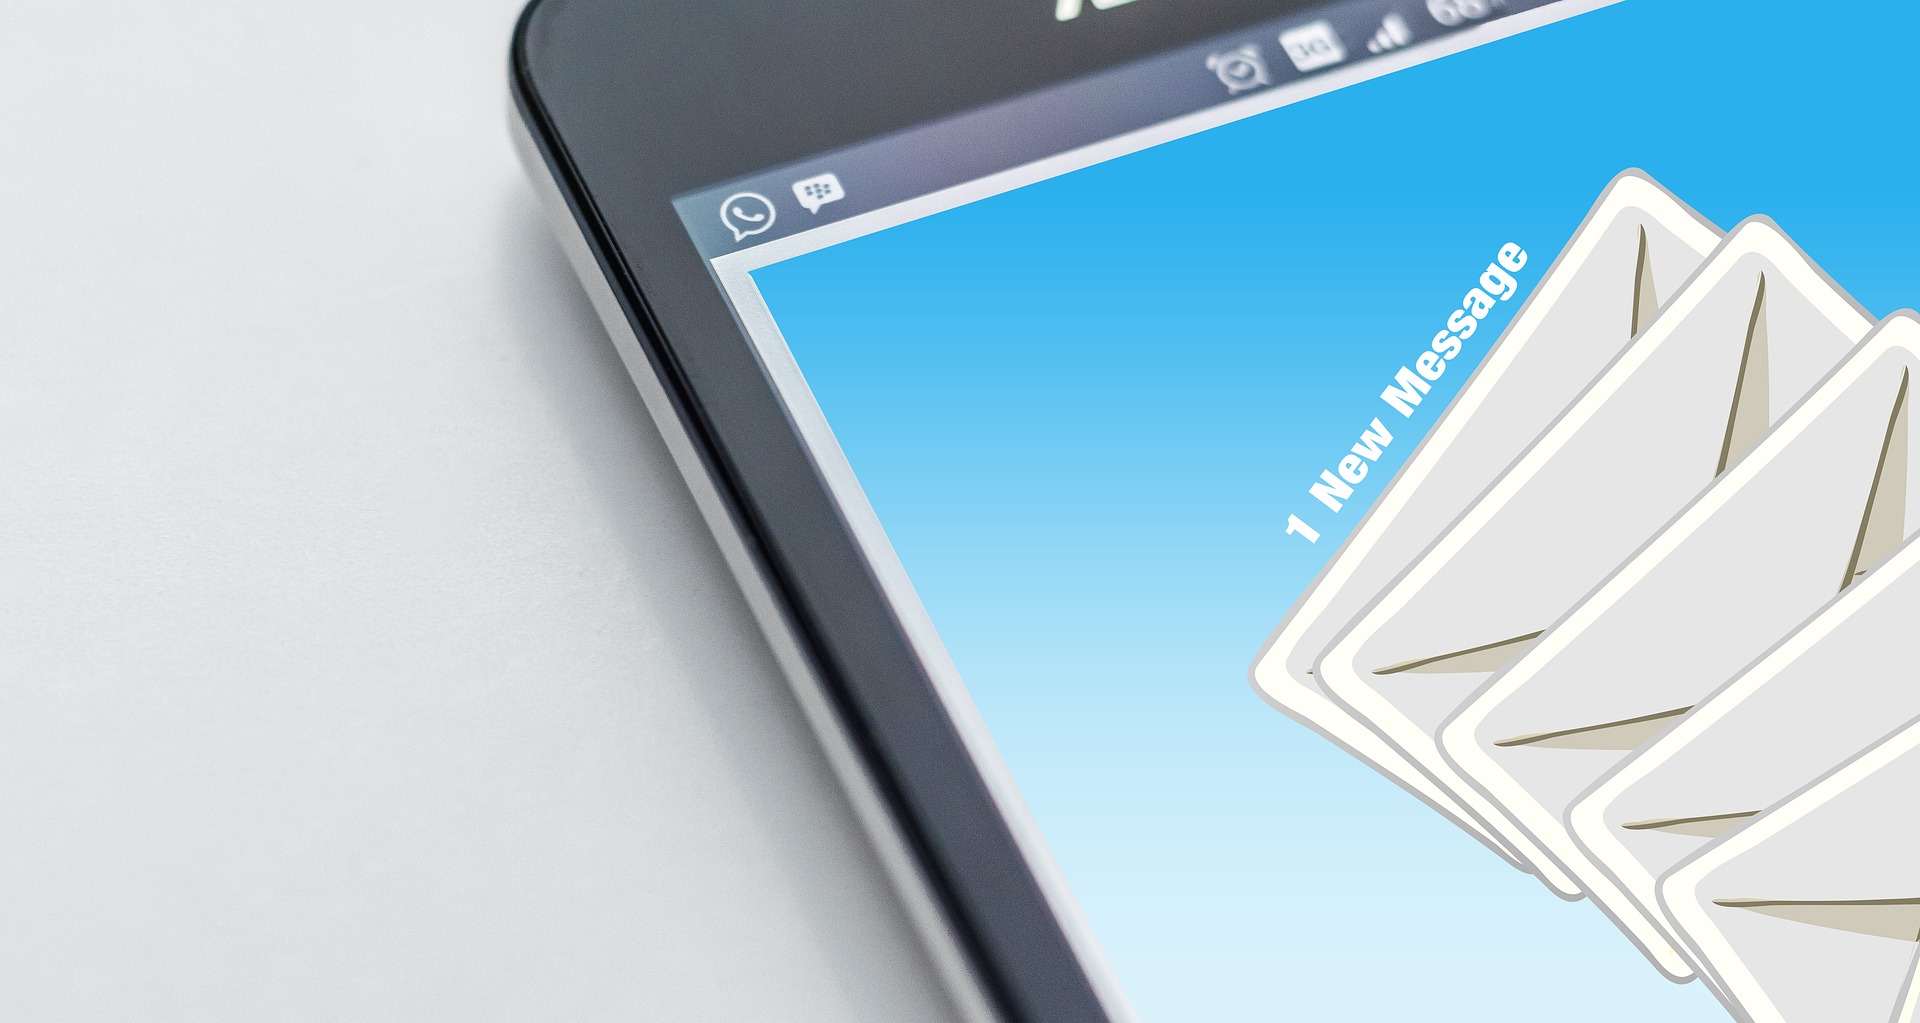 Come aprire un account email iCloud su dispositivo Android